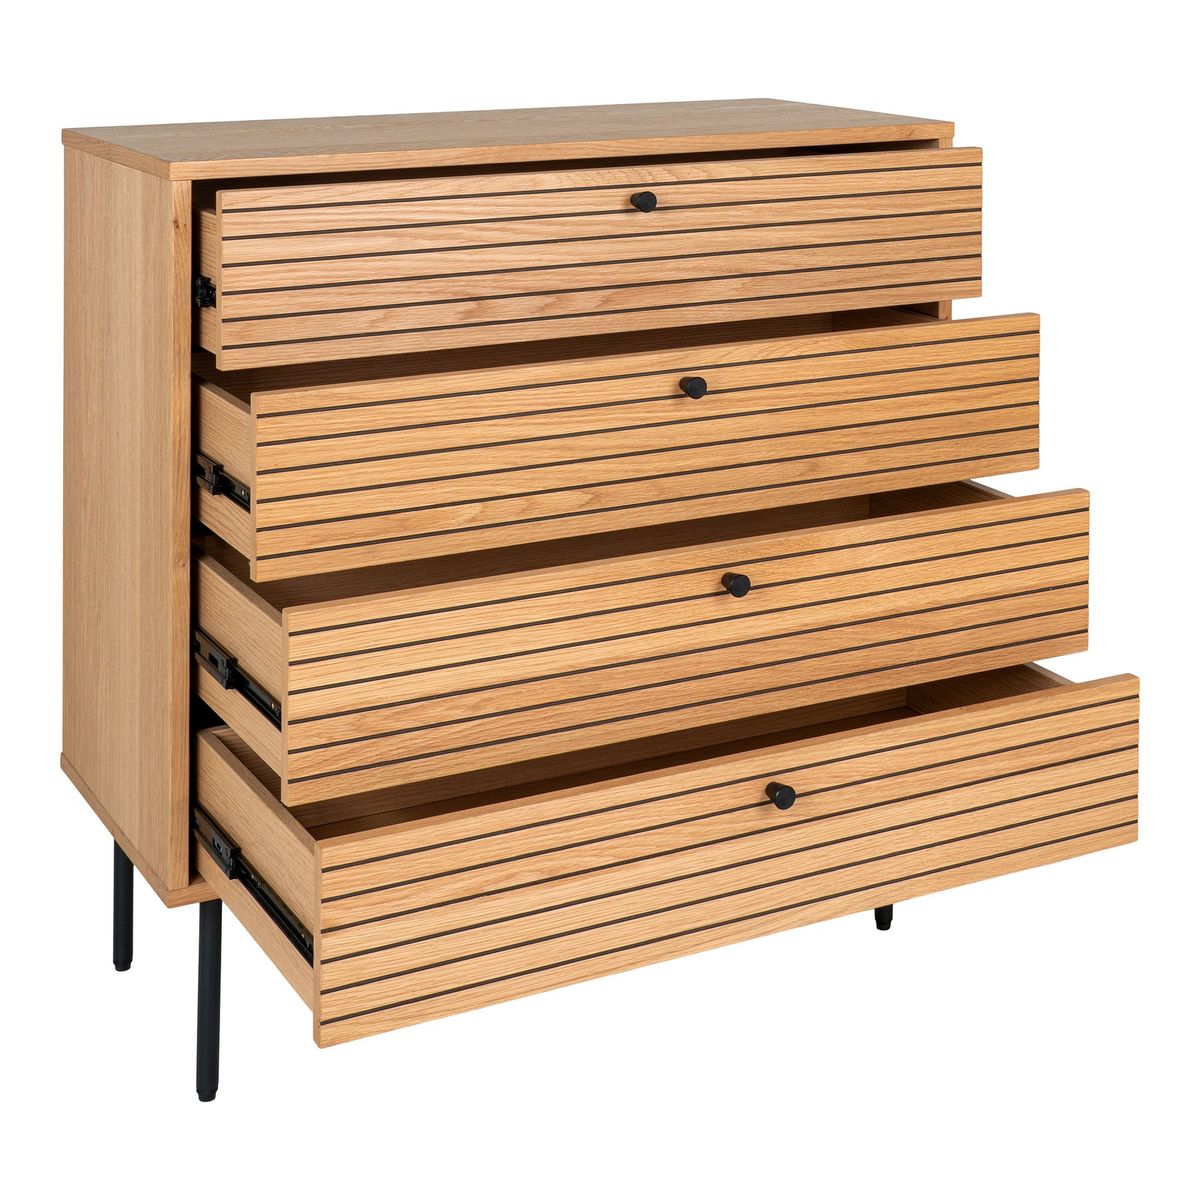 House Nordic Kyoto chest of drawers